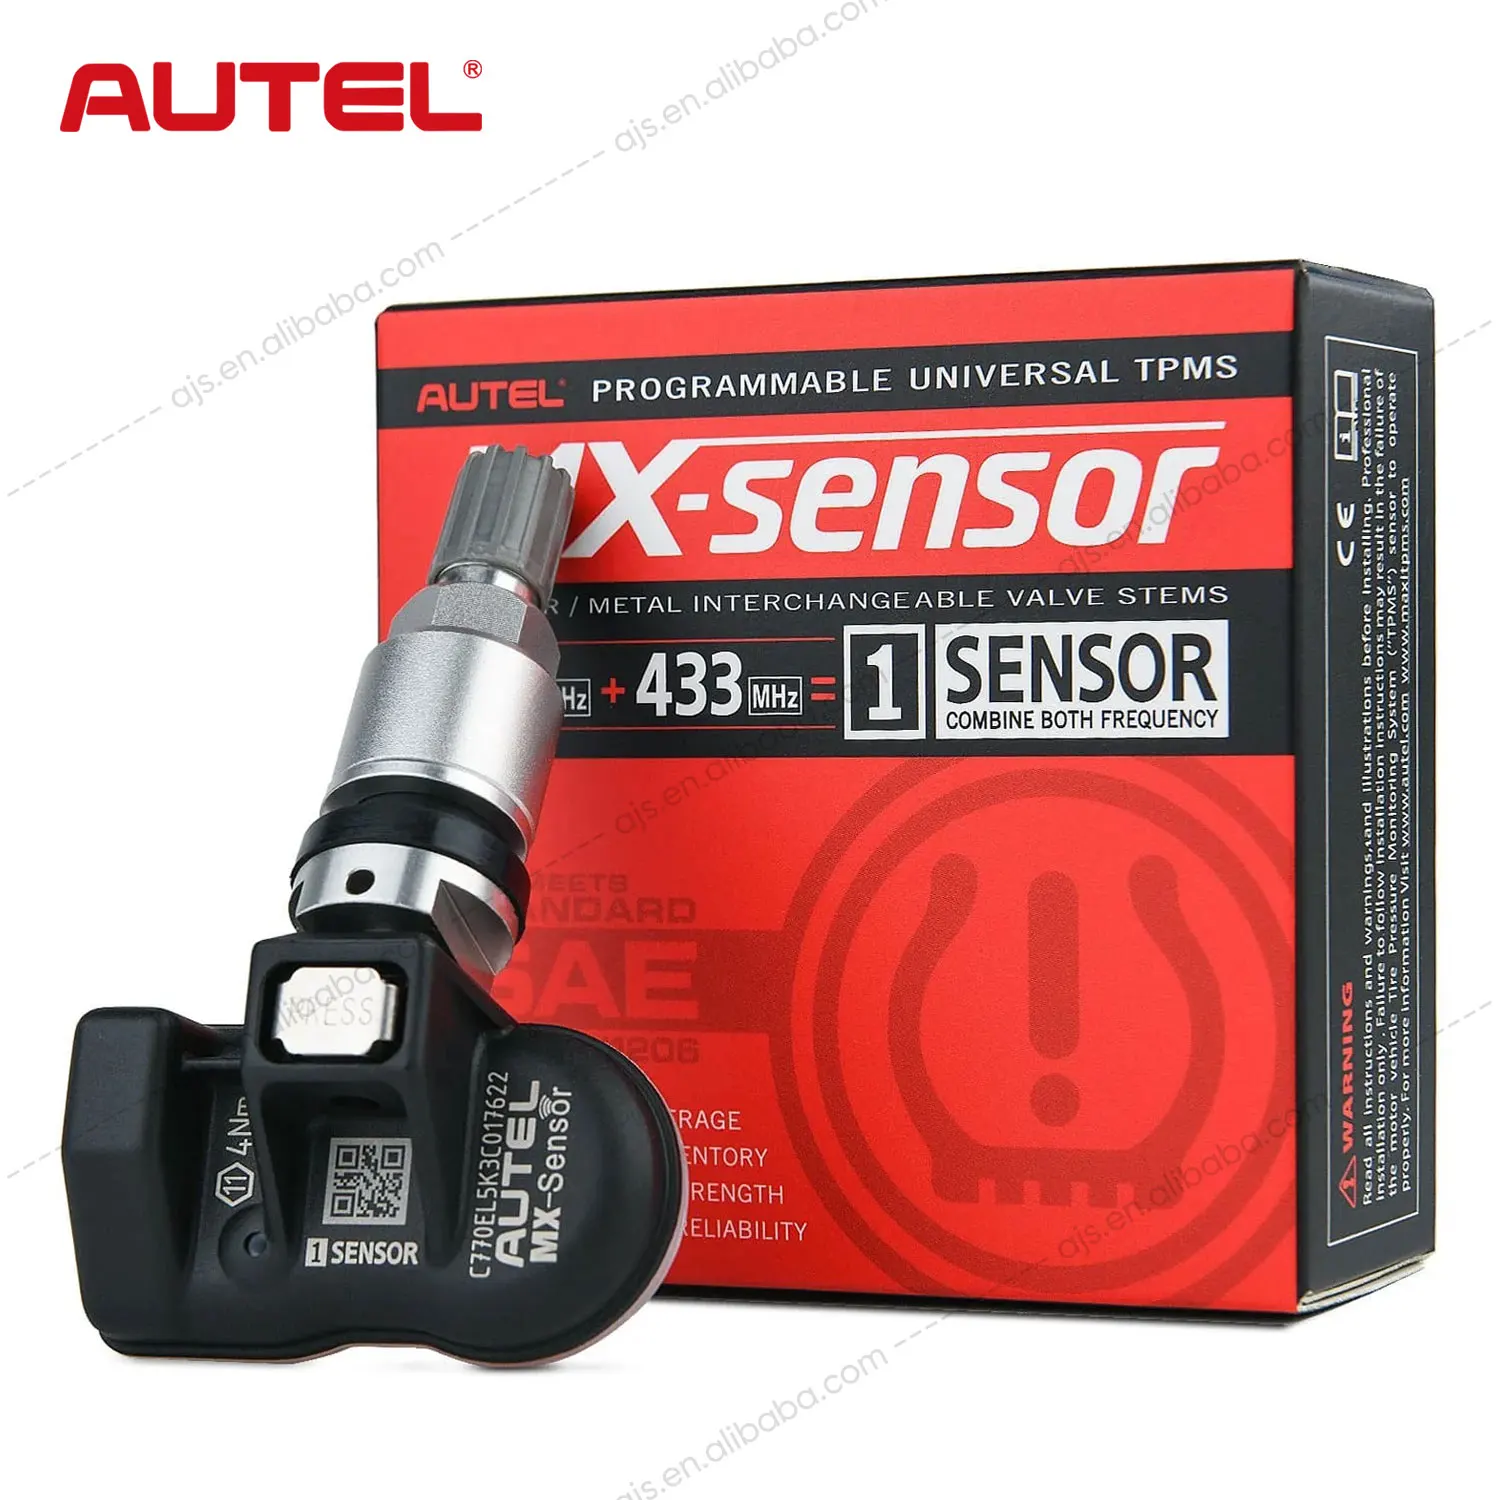 

Autel MX Sensor M Metal 433MHz & 315MHz 2in1 Tire Pressure Monitoring System Altar Universal Auto TPMS Tire Gauge For All Cars